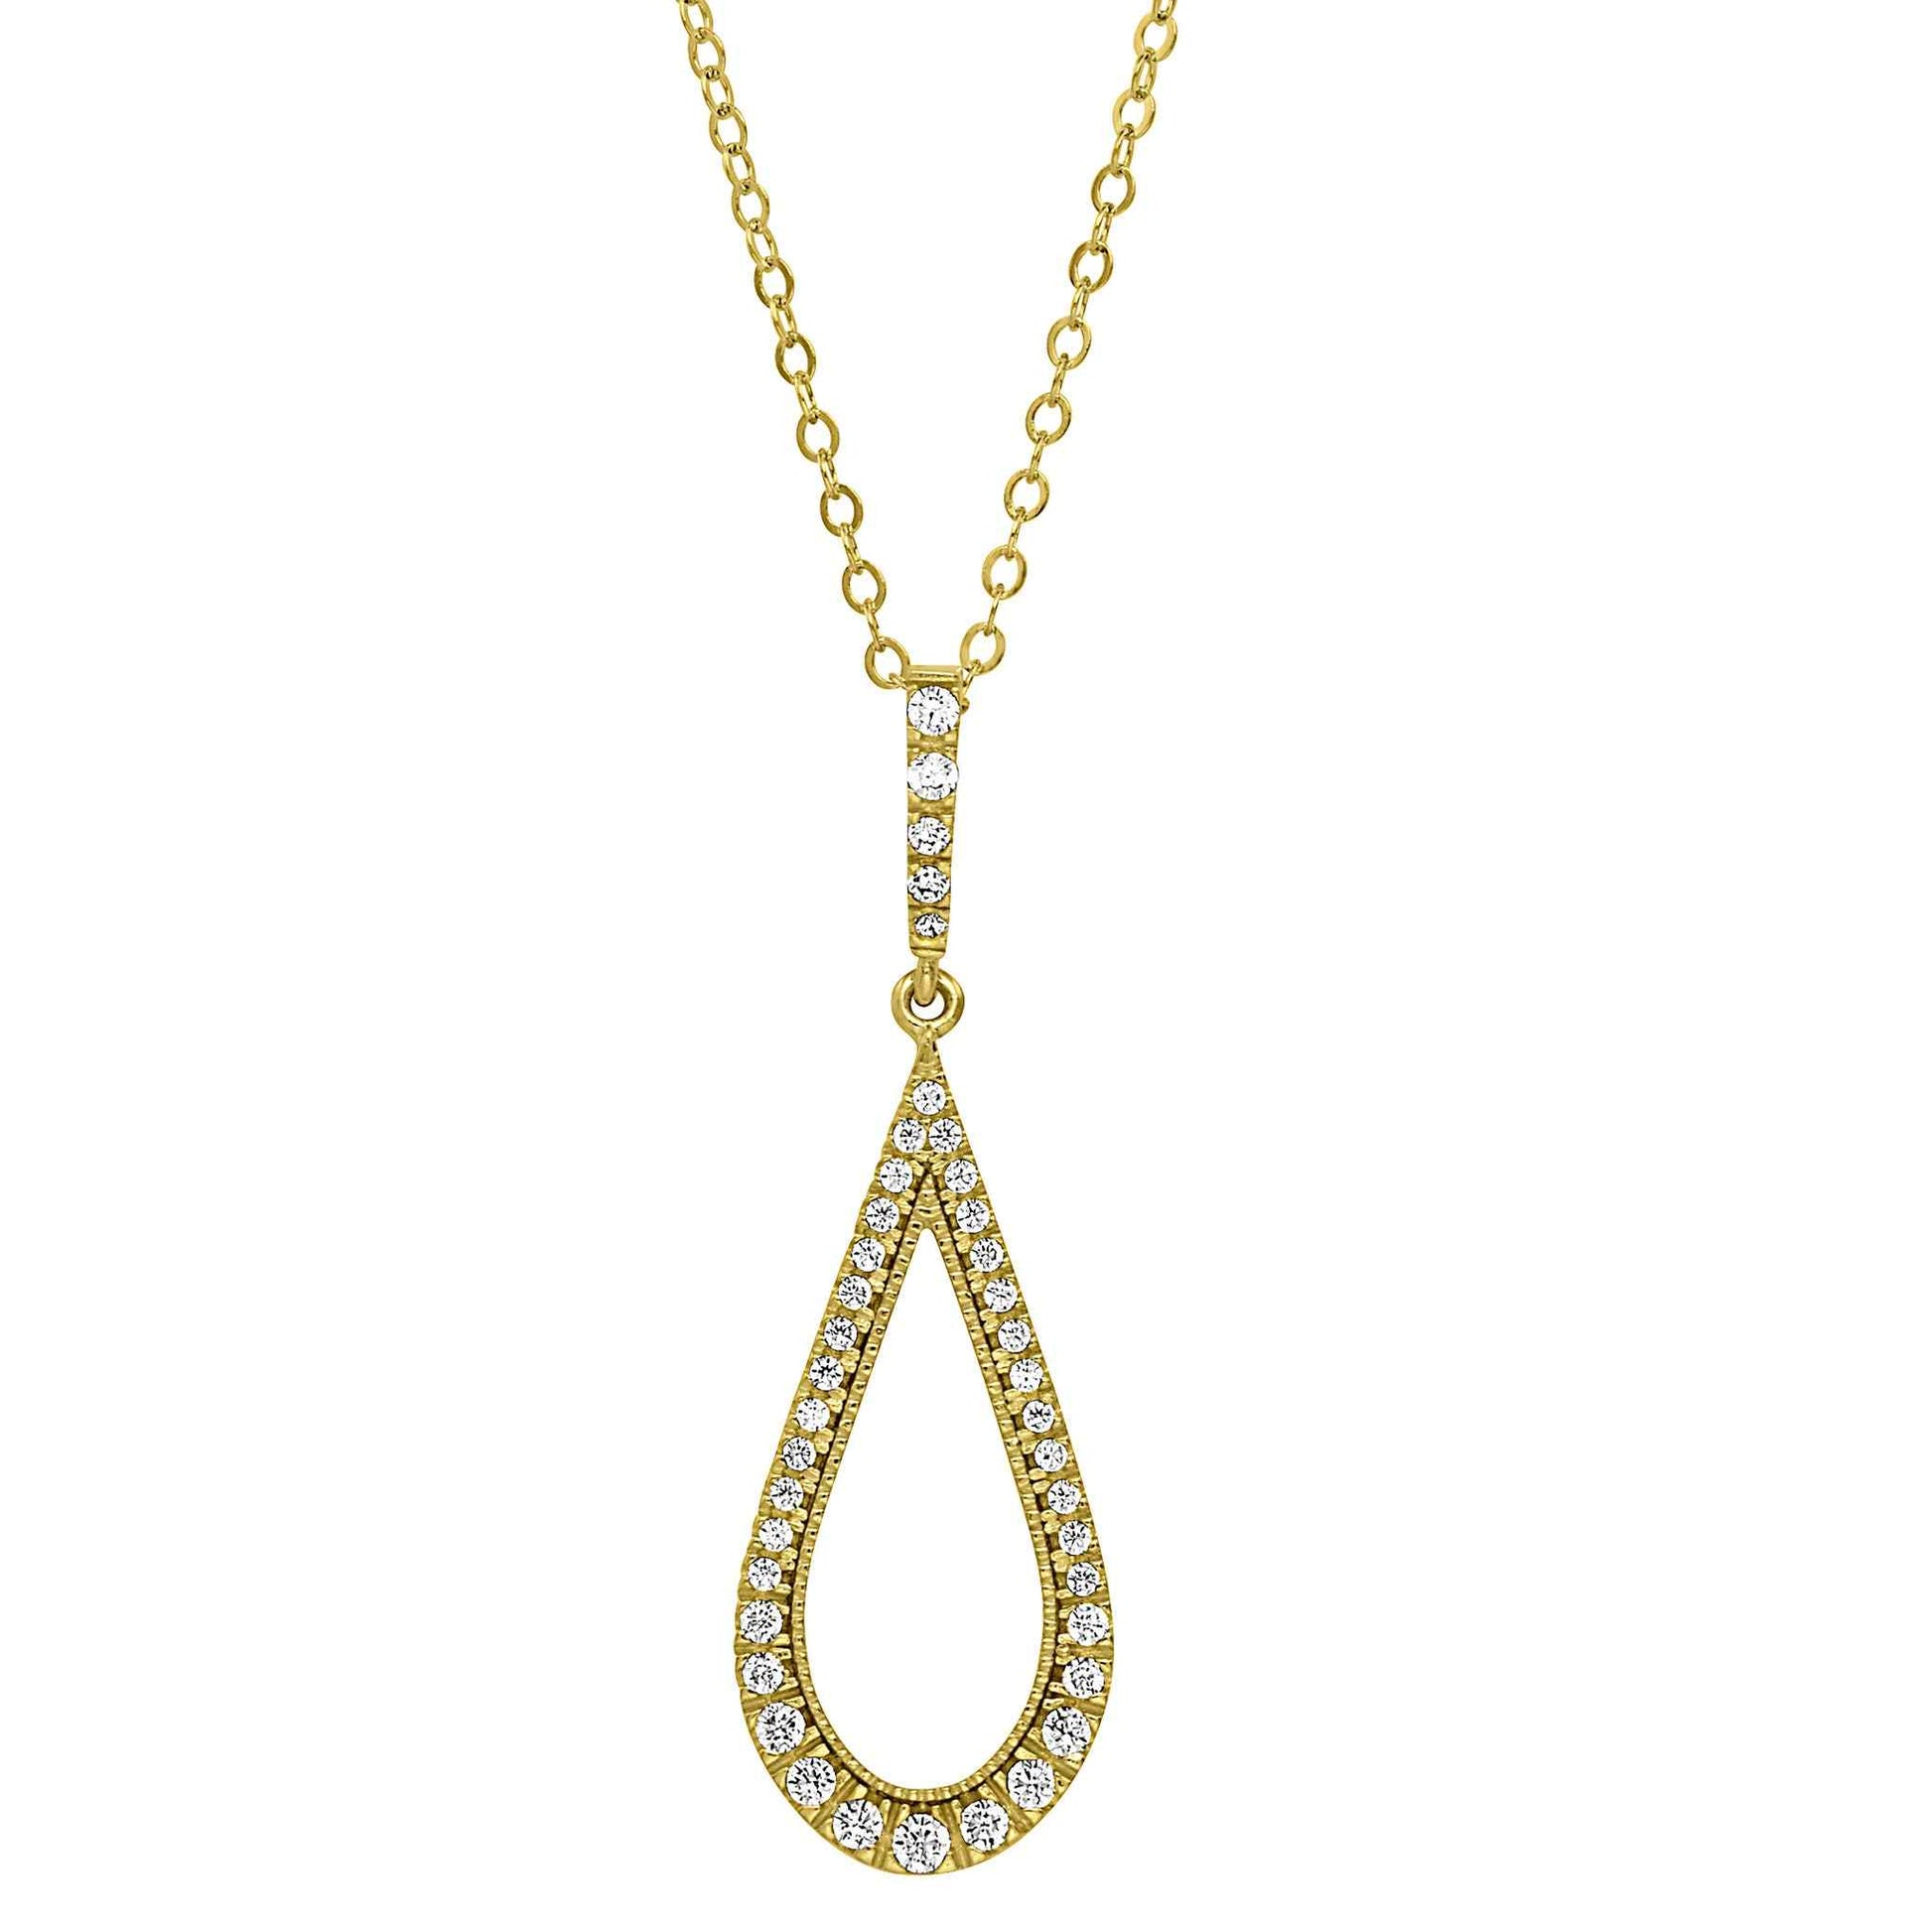 A sterling silver teardrop necklace with simulated diamonds displayed on a neutral white background.